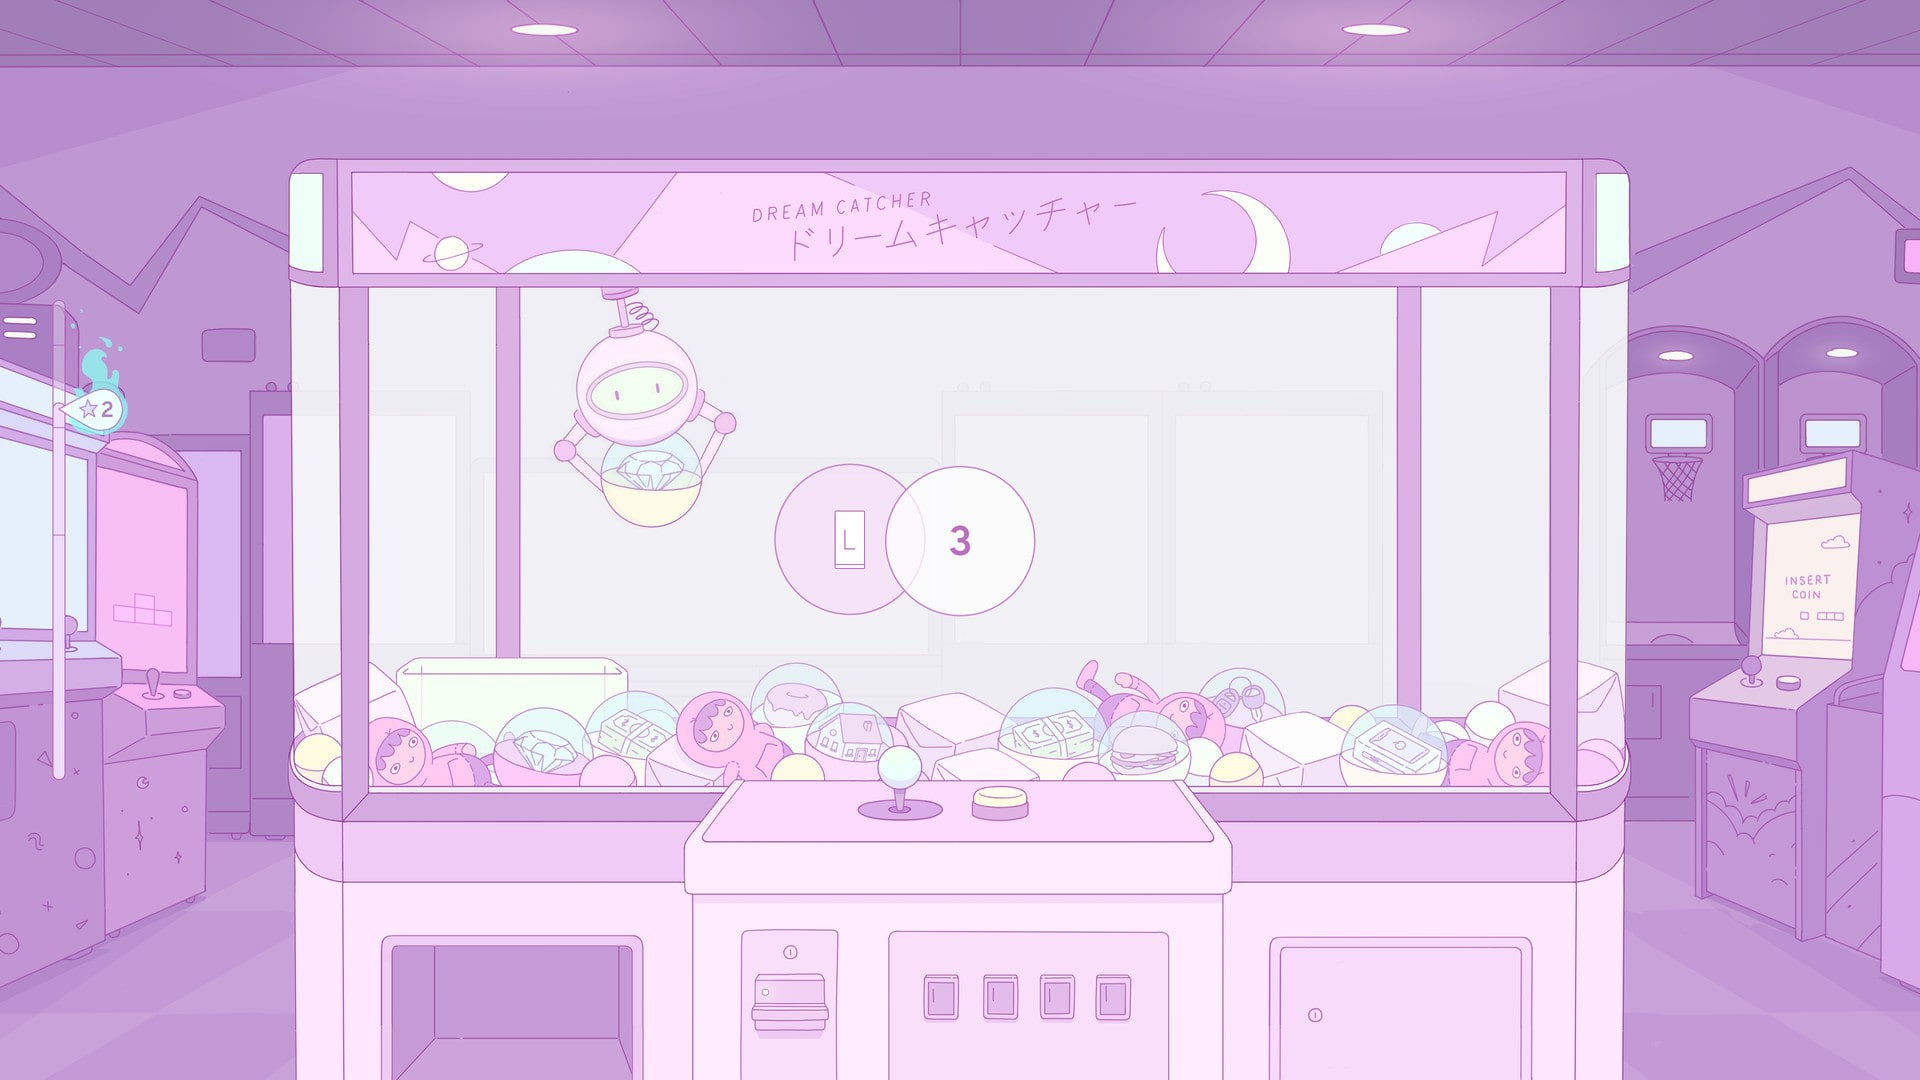 Some phonefriendly wallpapers I made by compositing screenshots   rbeeandpuppycat